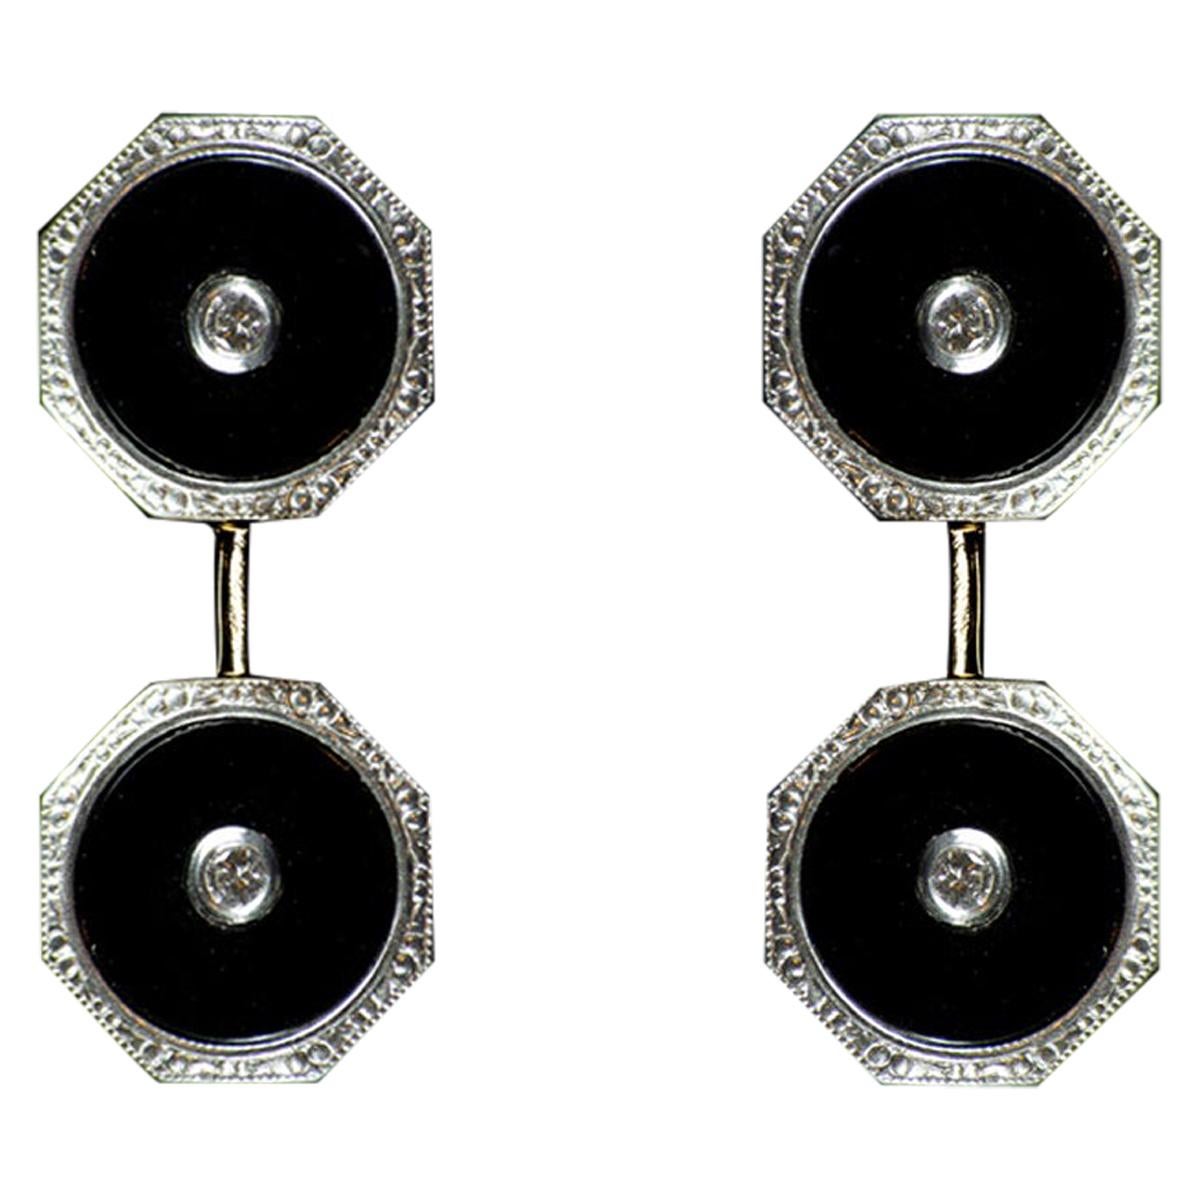 1930s 18 Kt White Gold Antique Cufflinks with Onyx and Diamonds For Sale